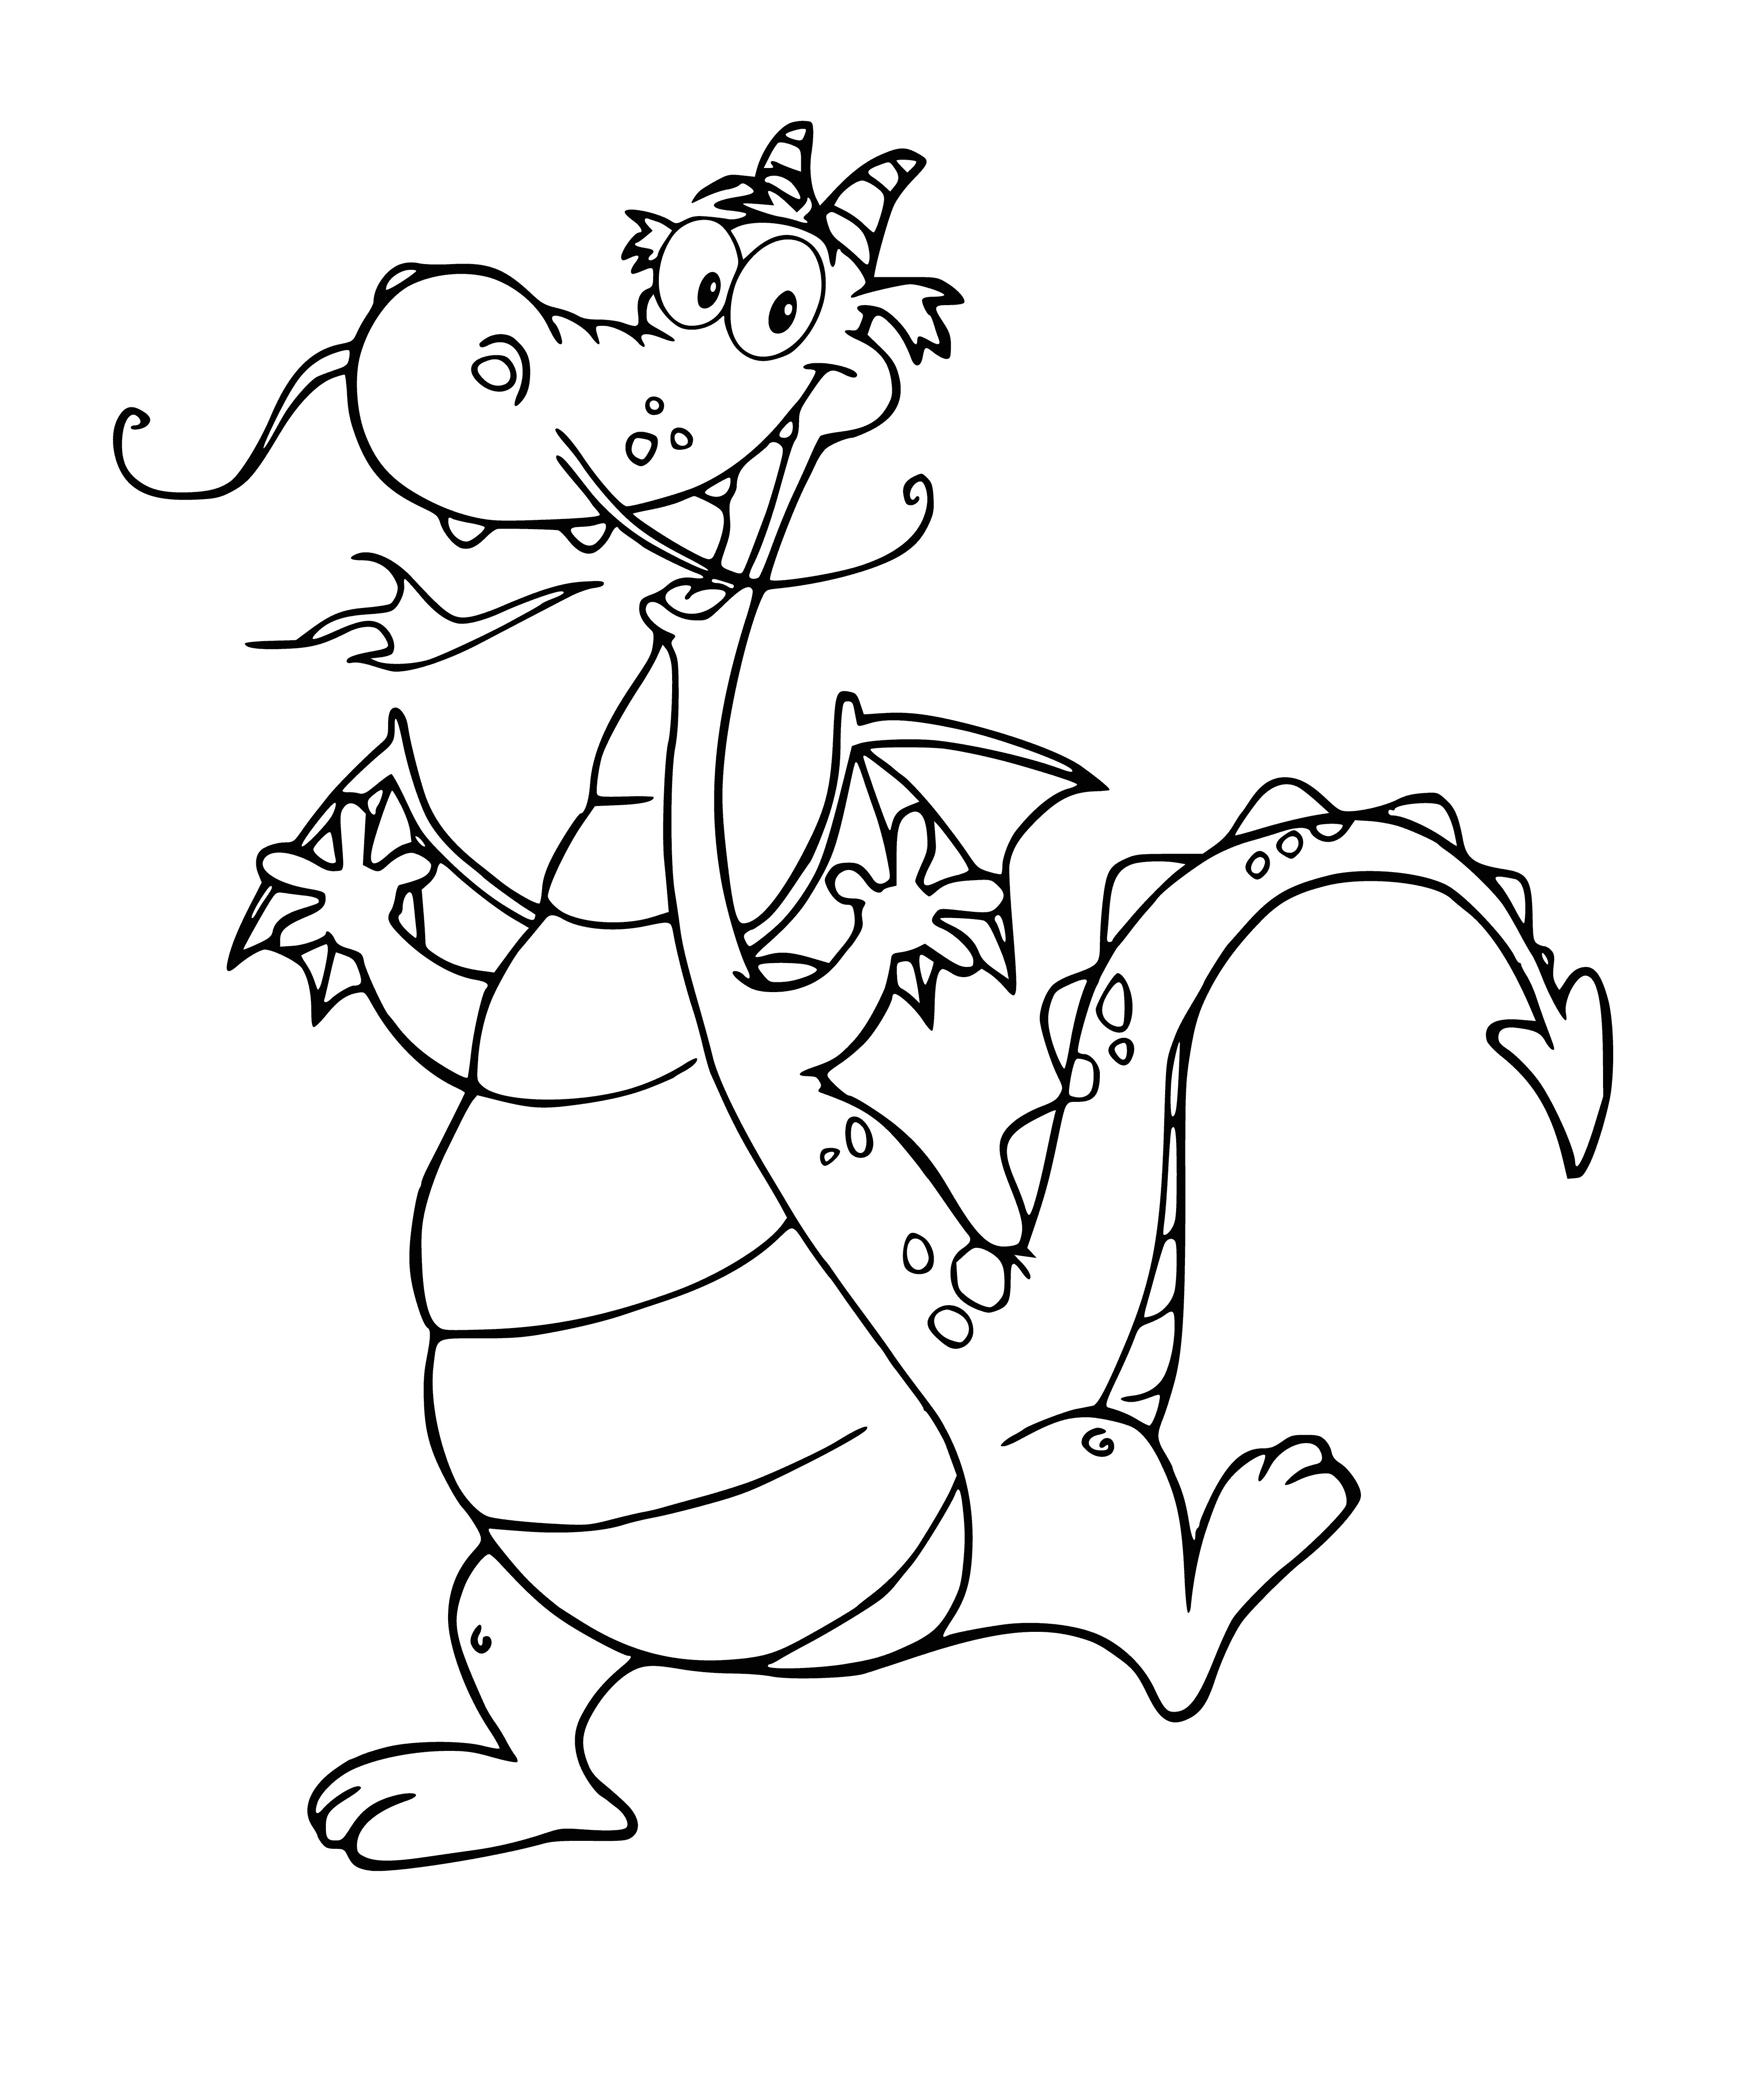 Cheerful dragon coloring page